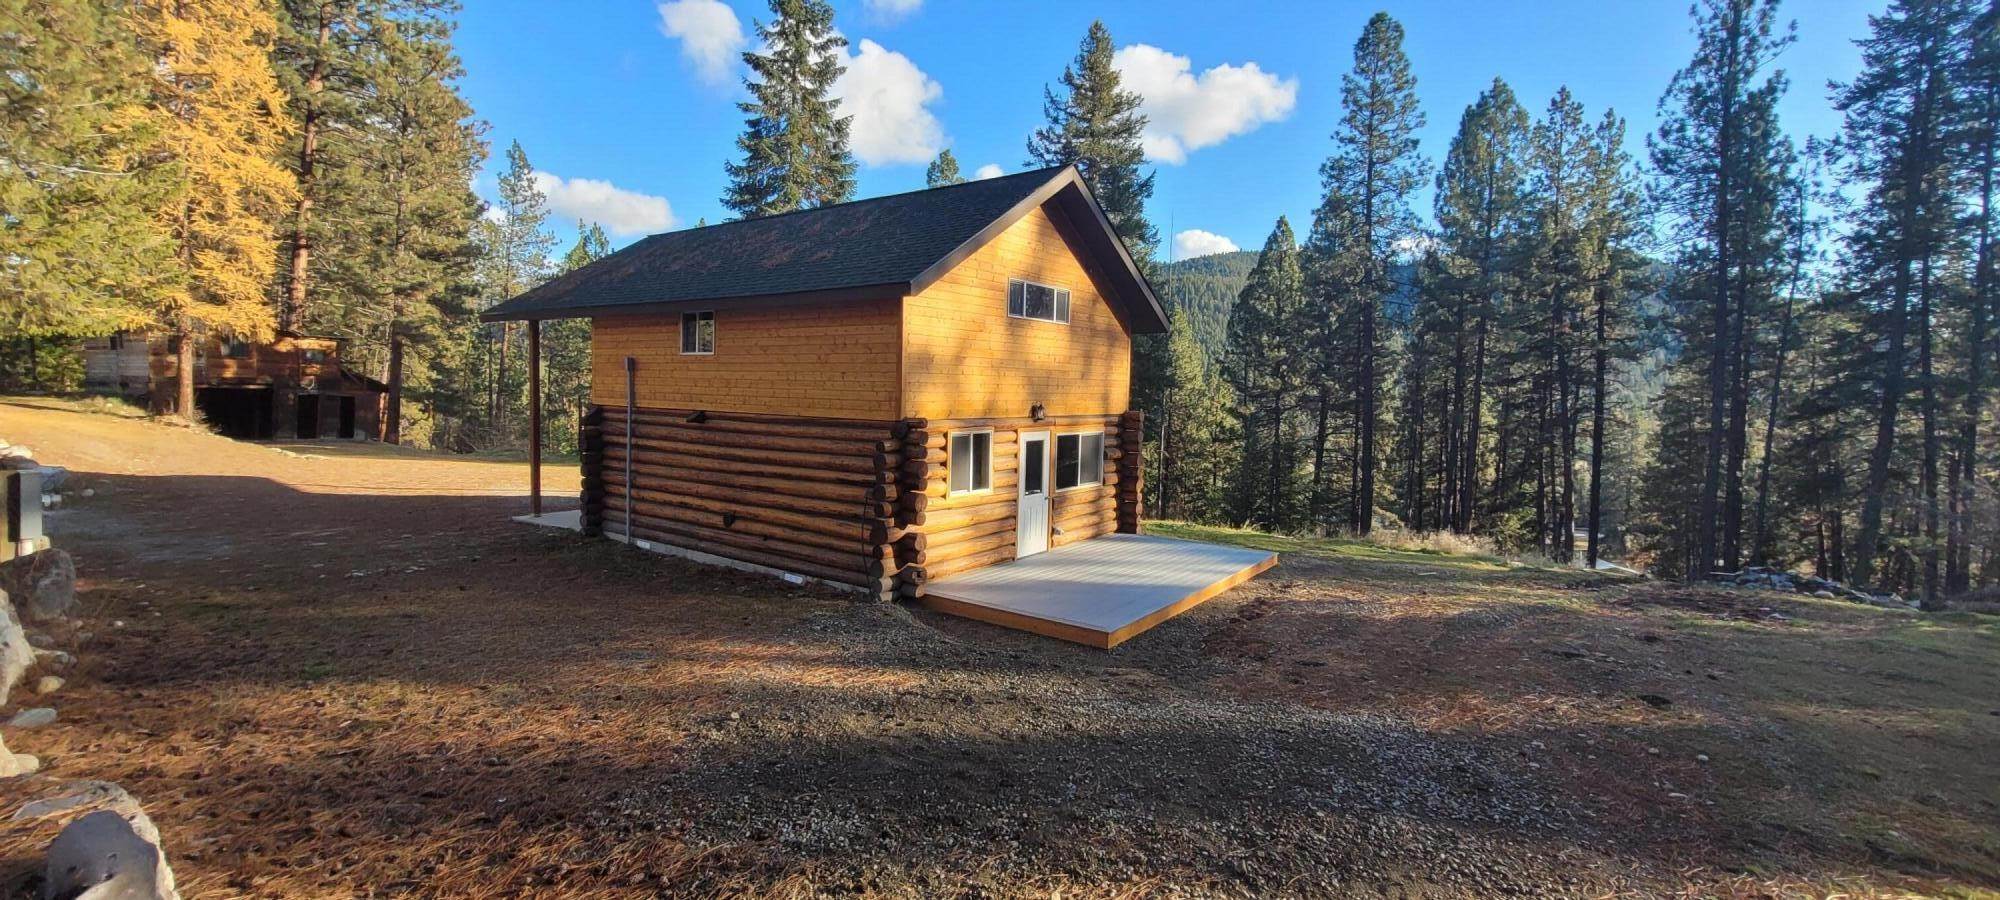 19. Single Family Homes for Sale at 37 Wades Road, Libby, Montana 59923 United States